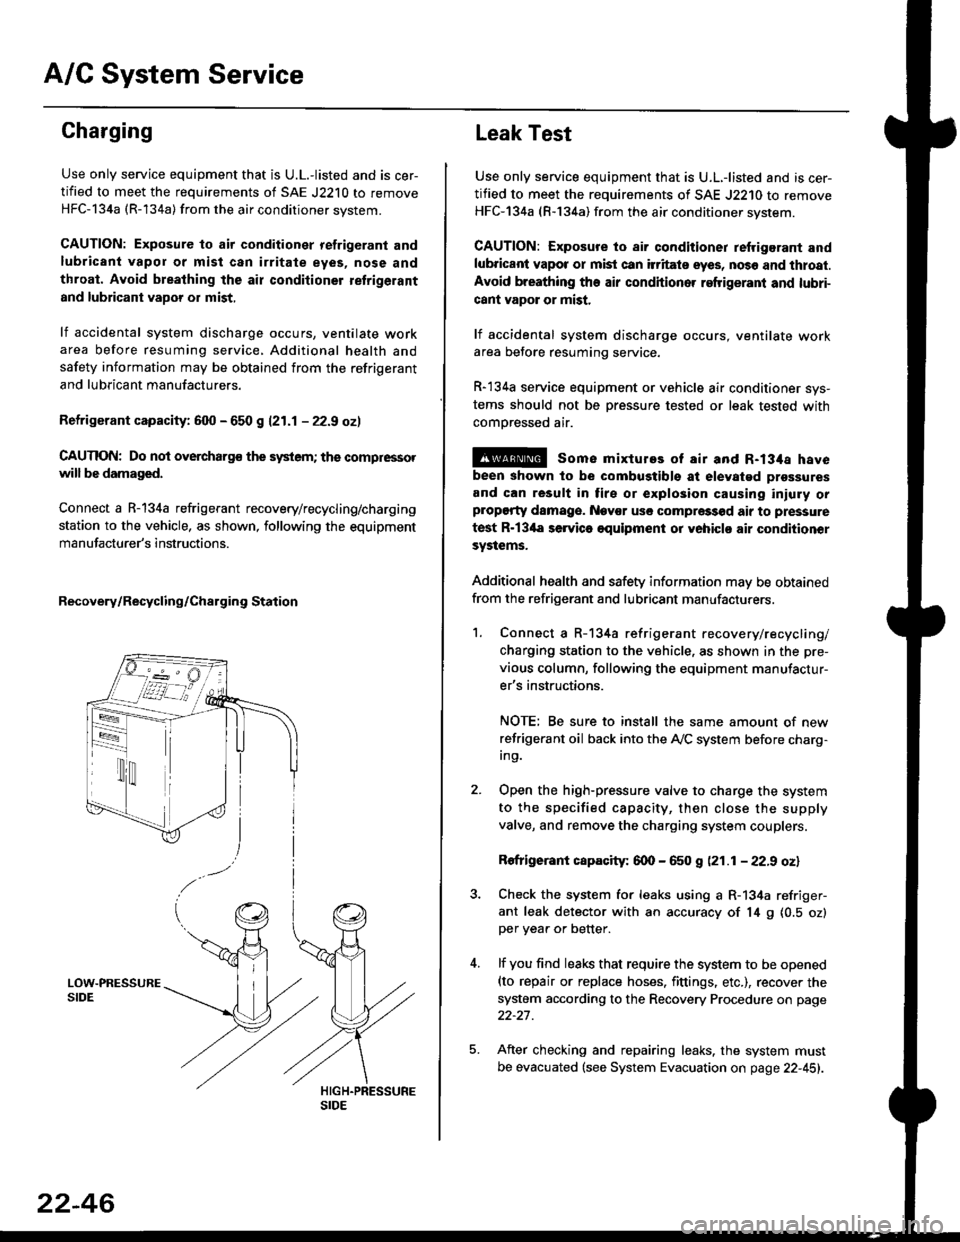 HONDA CIVIC 1999 6.G User Guide A/C System Service
Charging
Use only service equipment that is U.L.-listed and is cer-
tified to meet the requirements of SAE J2210 to remove
HFC-134a (R-134a) from the air conditioner system.
CAUTION